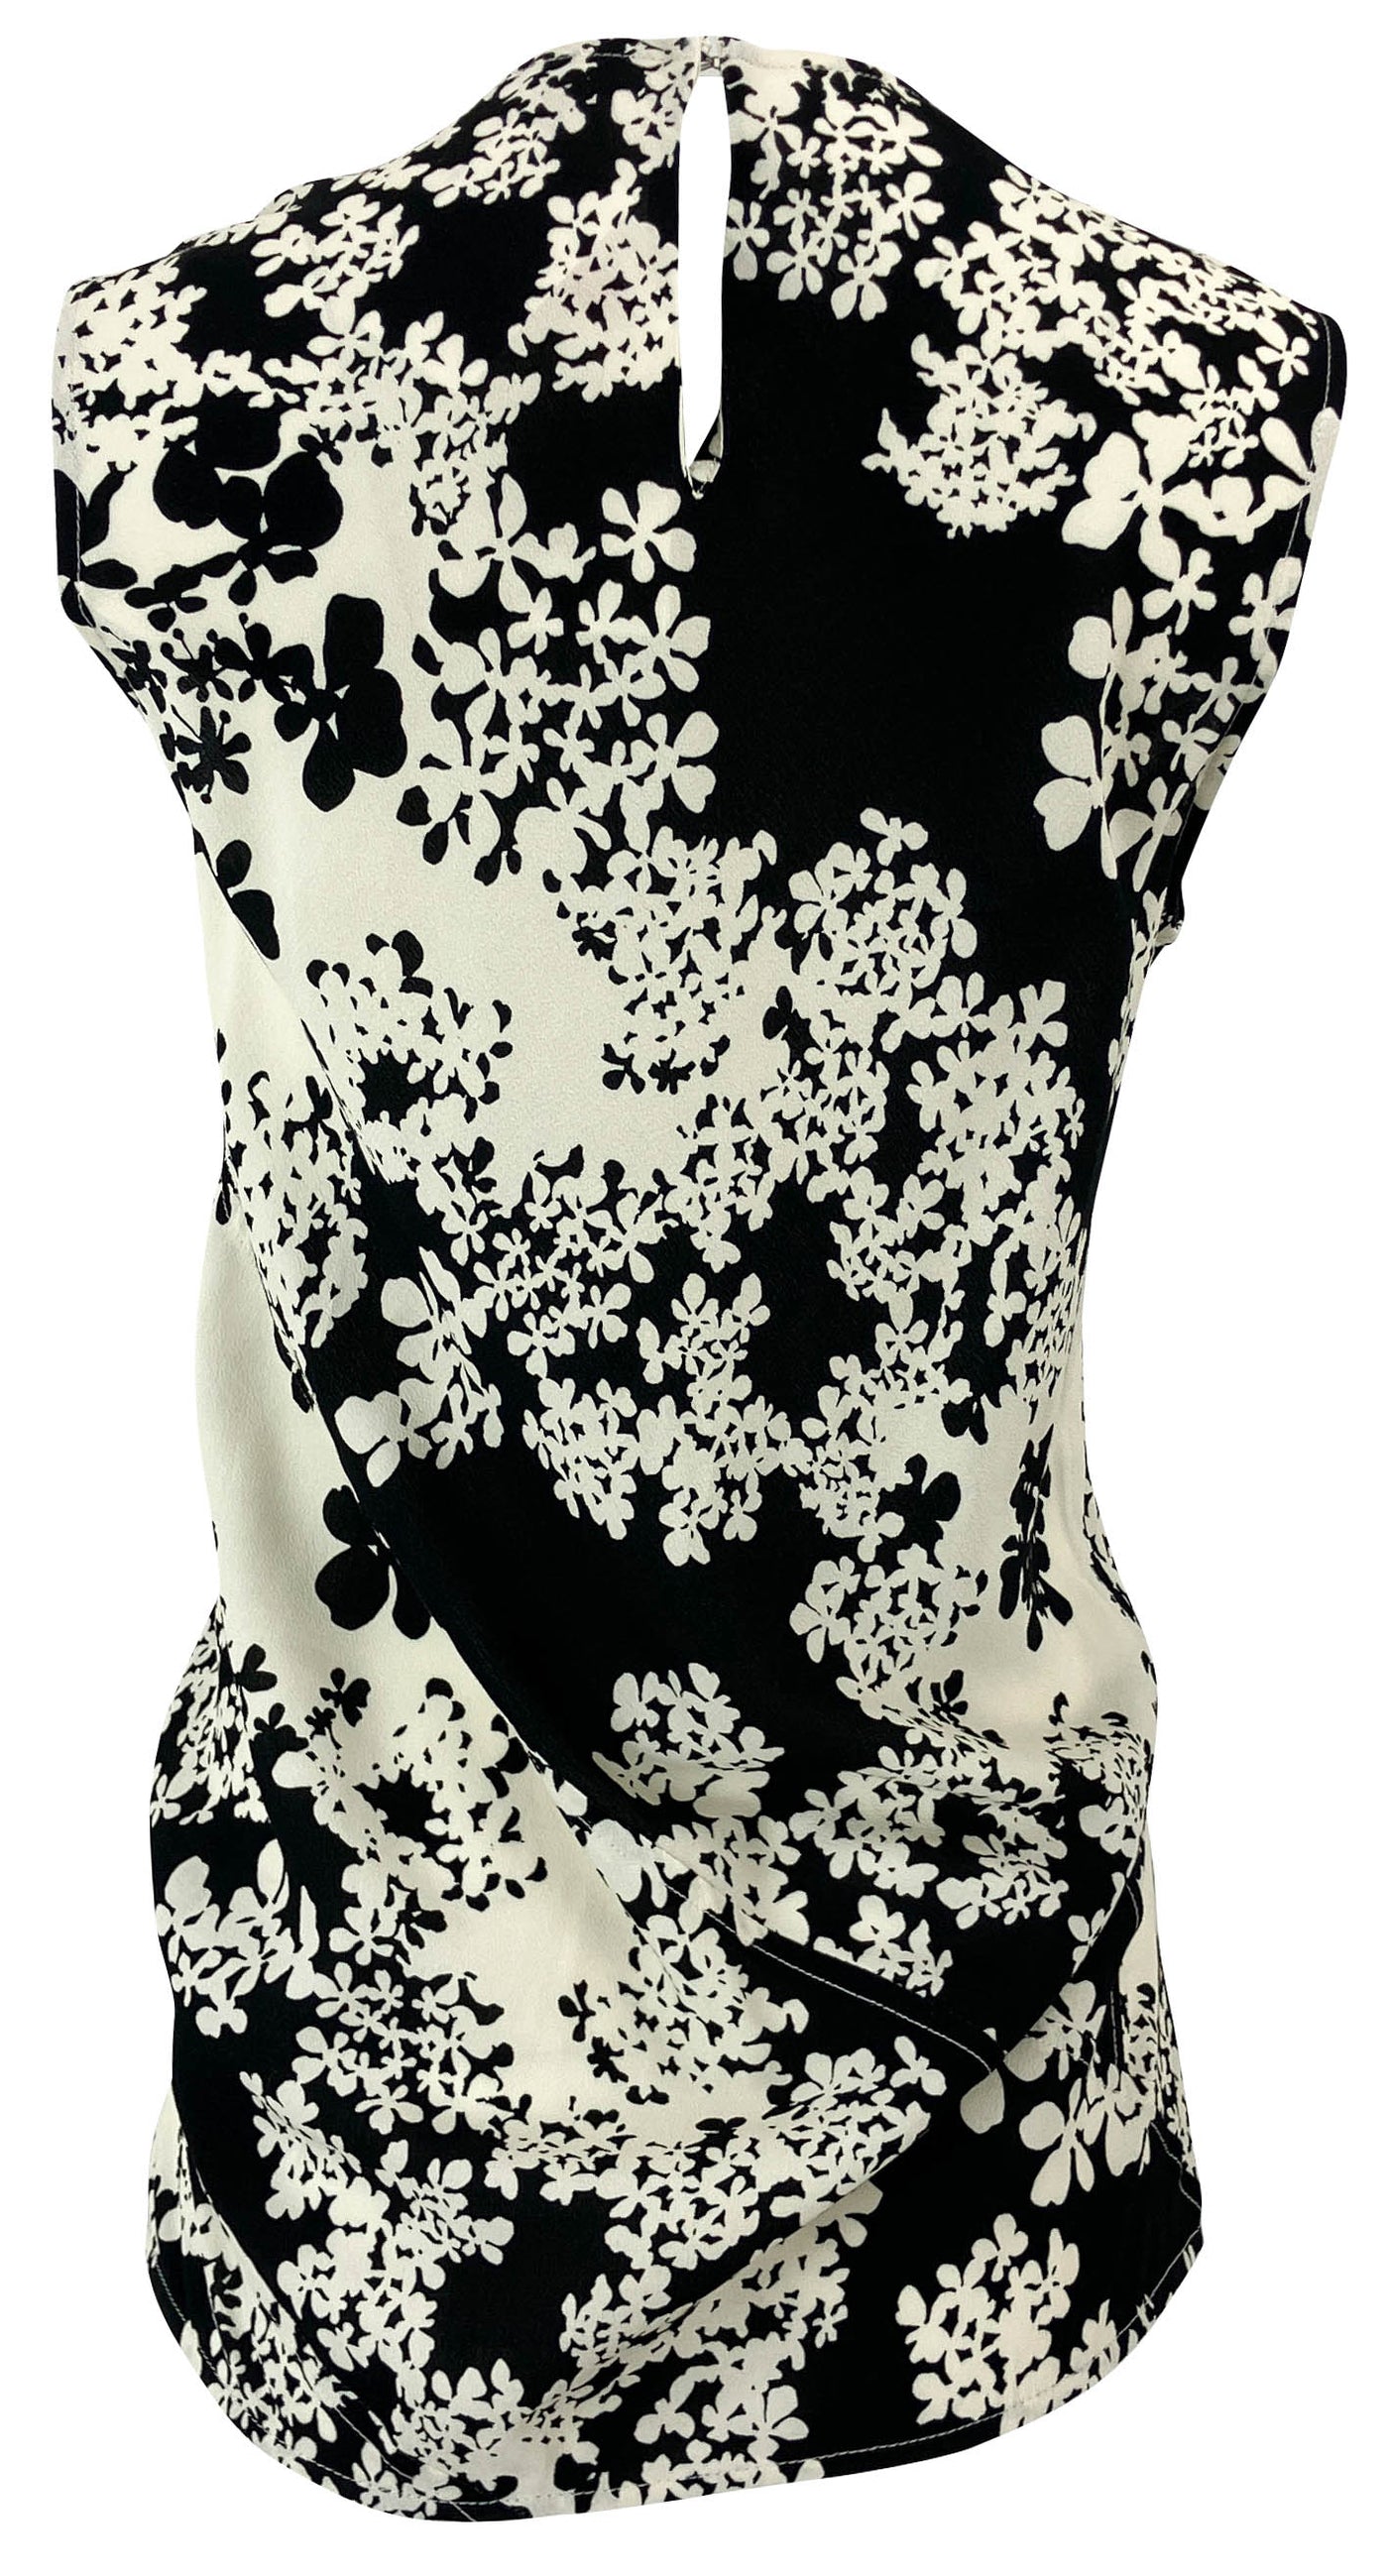 Toteme Twisted Seam Floral Top in Black and Cream - Discounts on Toteme at UAL